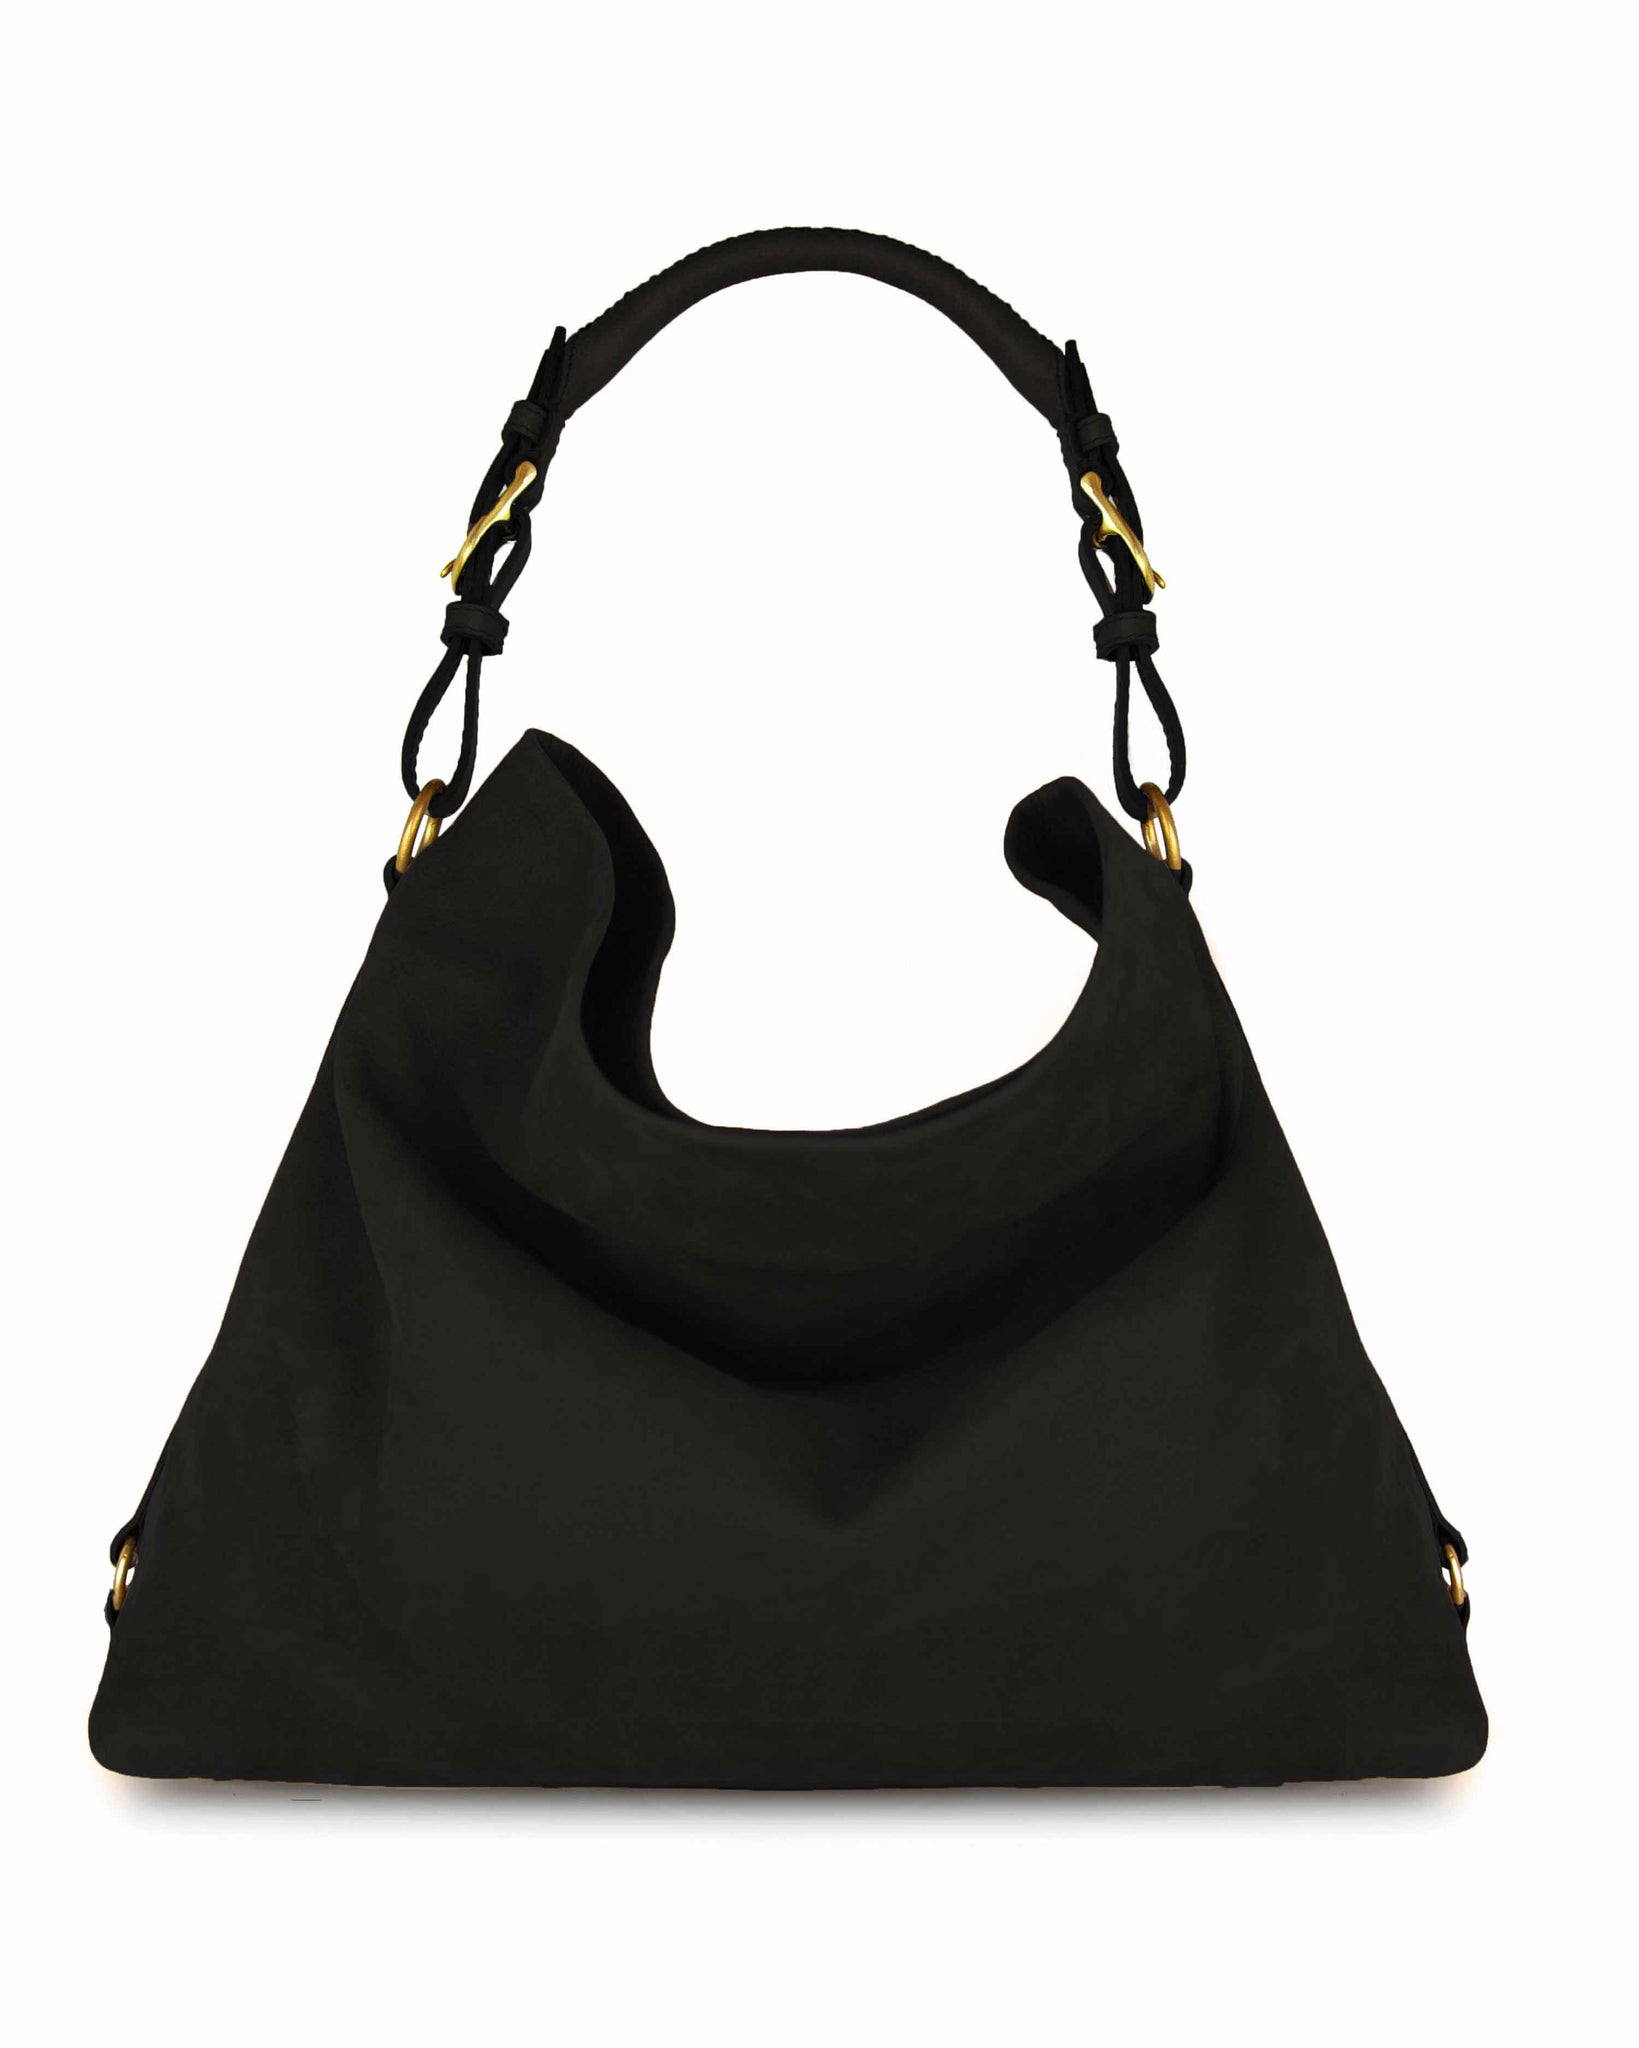 Gucci Signature Large Hobo Bag in Black